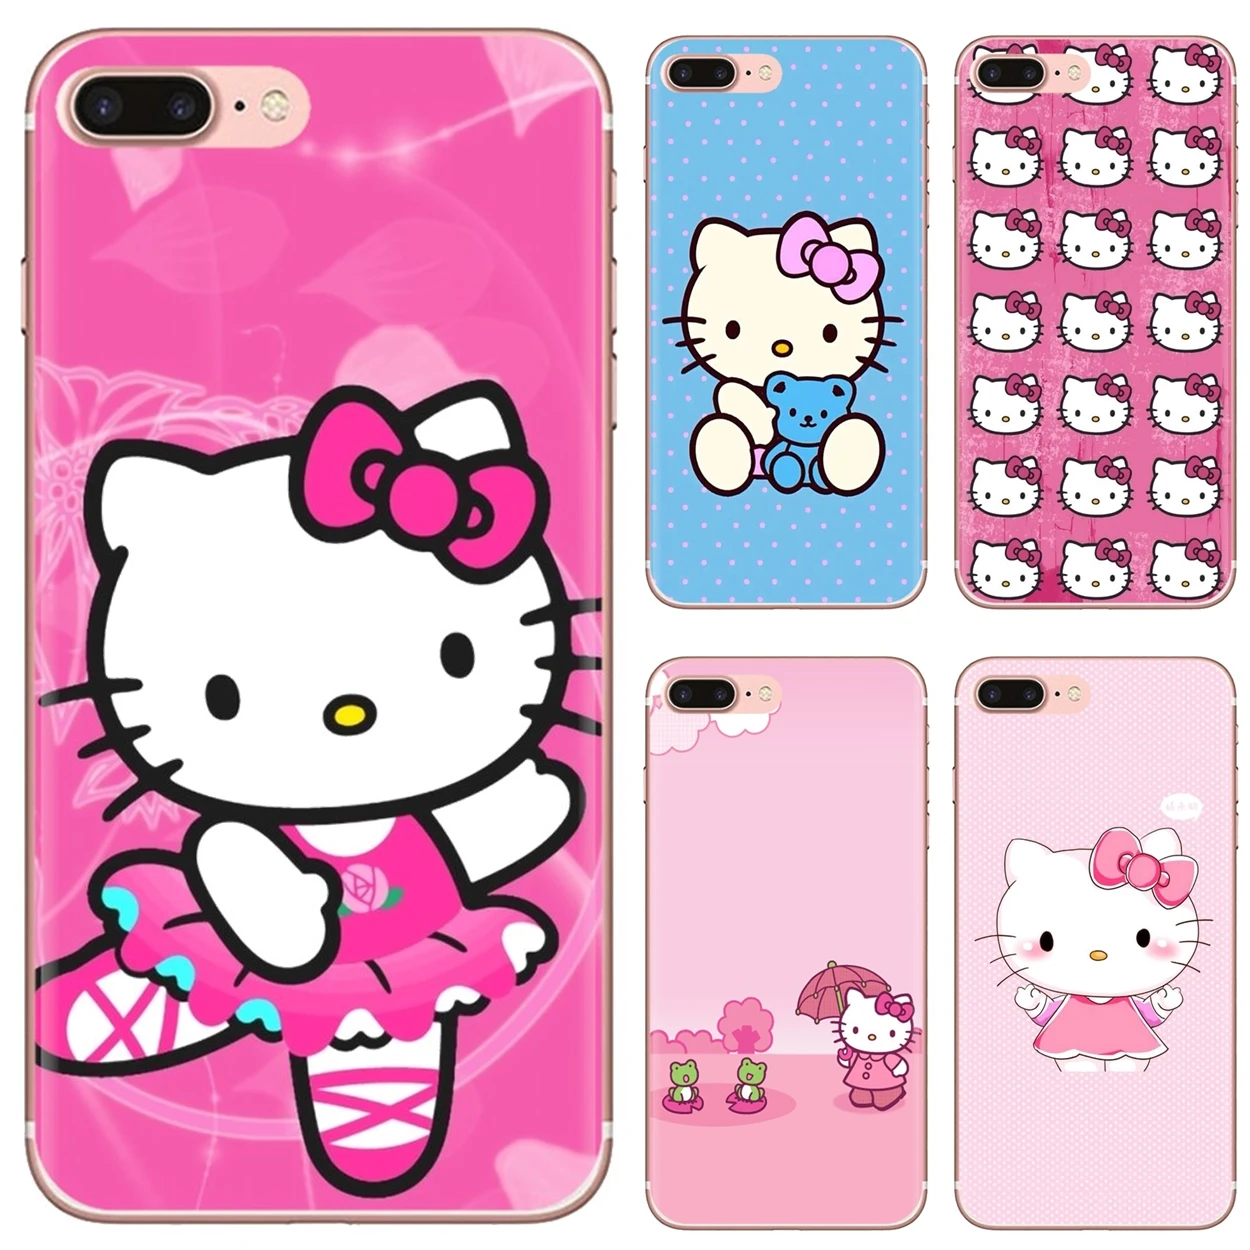 

Transparent TPU Skin Cover For iPod Touch iPhone 10 11 12 Pro 4S 5S SE 5C 6 6S 7 8 X XR XS Plus Max 2020 Lovely Pink Hello Kitty